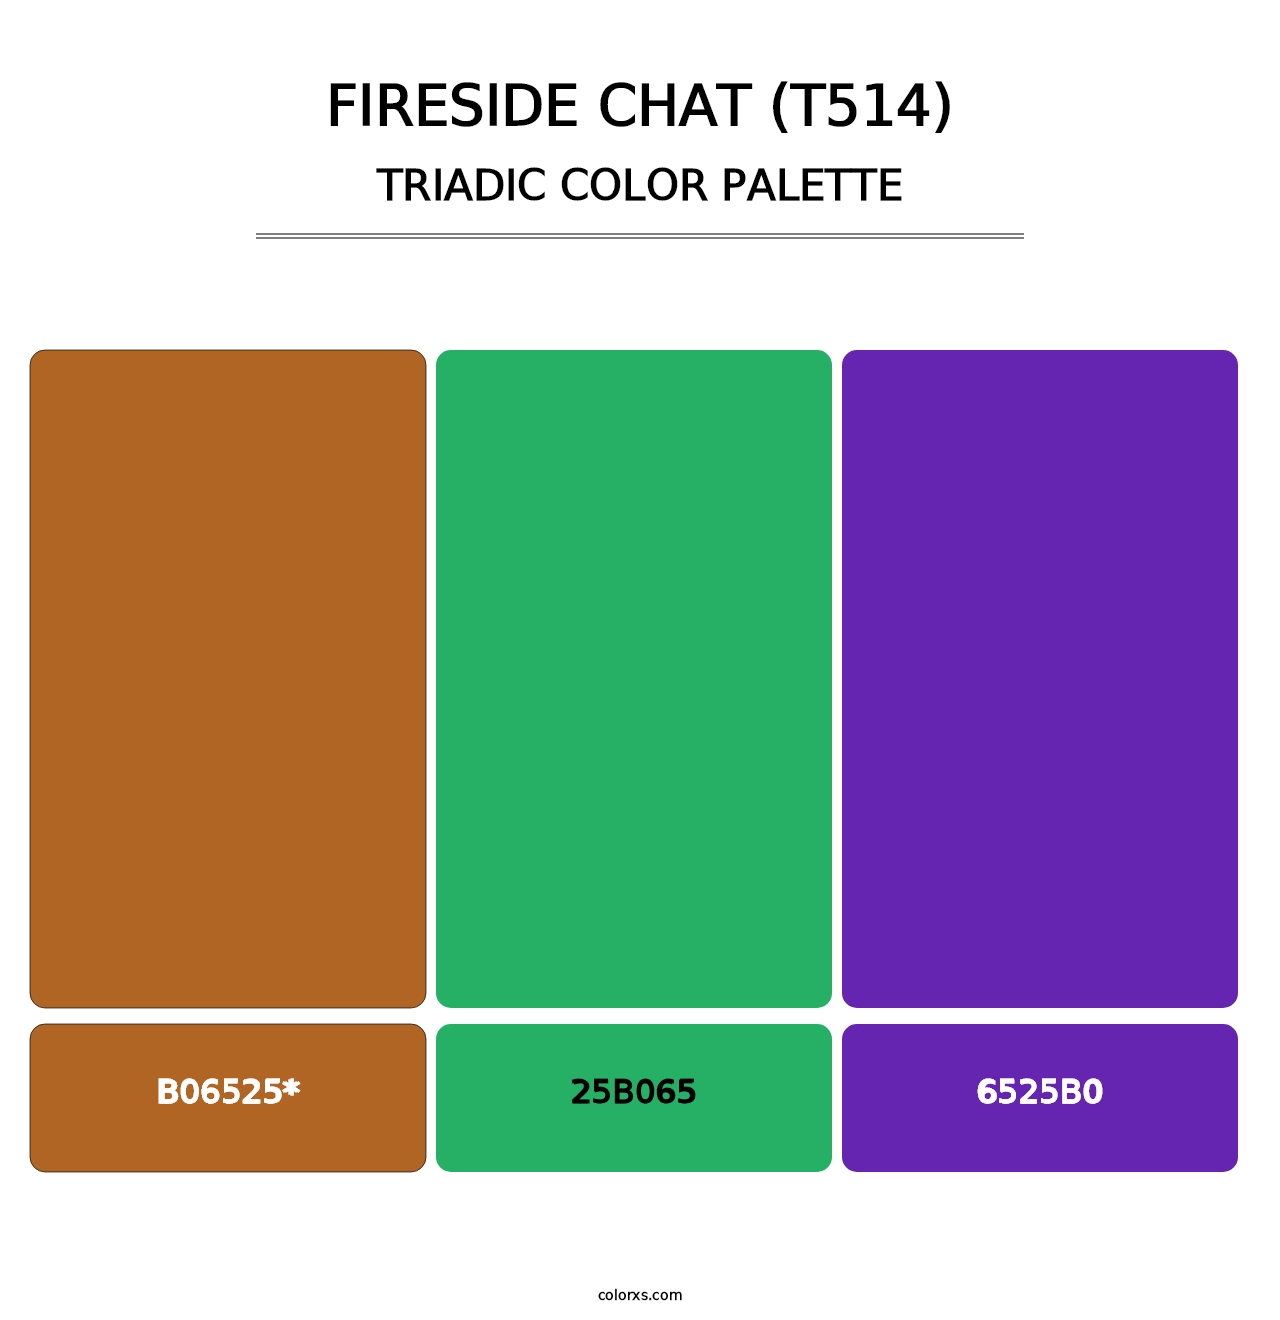 Fireside Chat (T514) - Triadic Color Palette